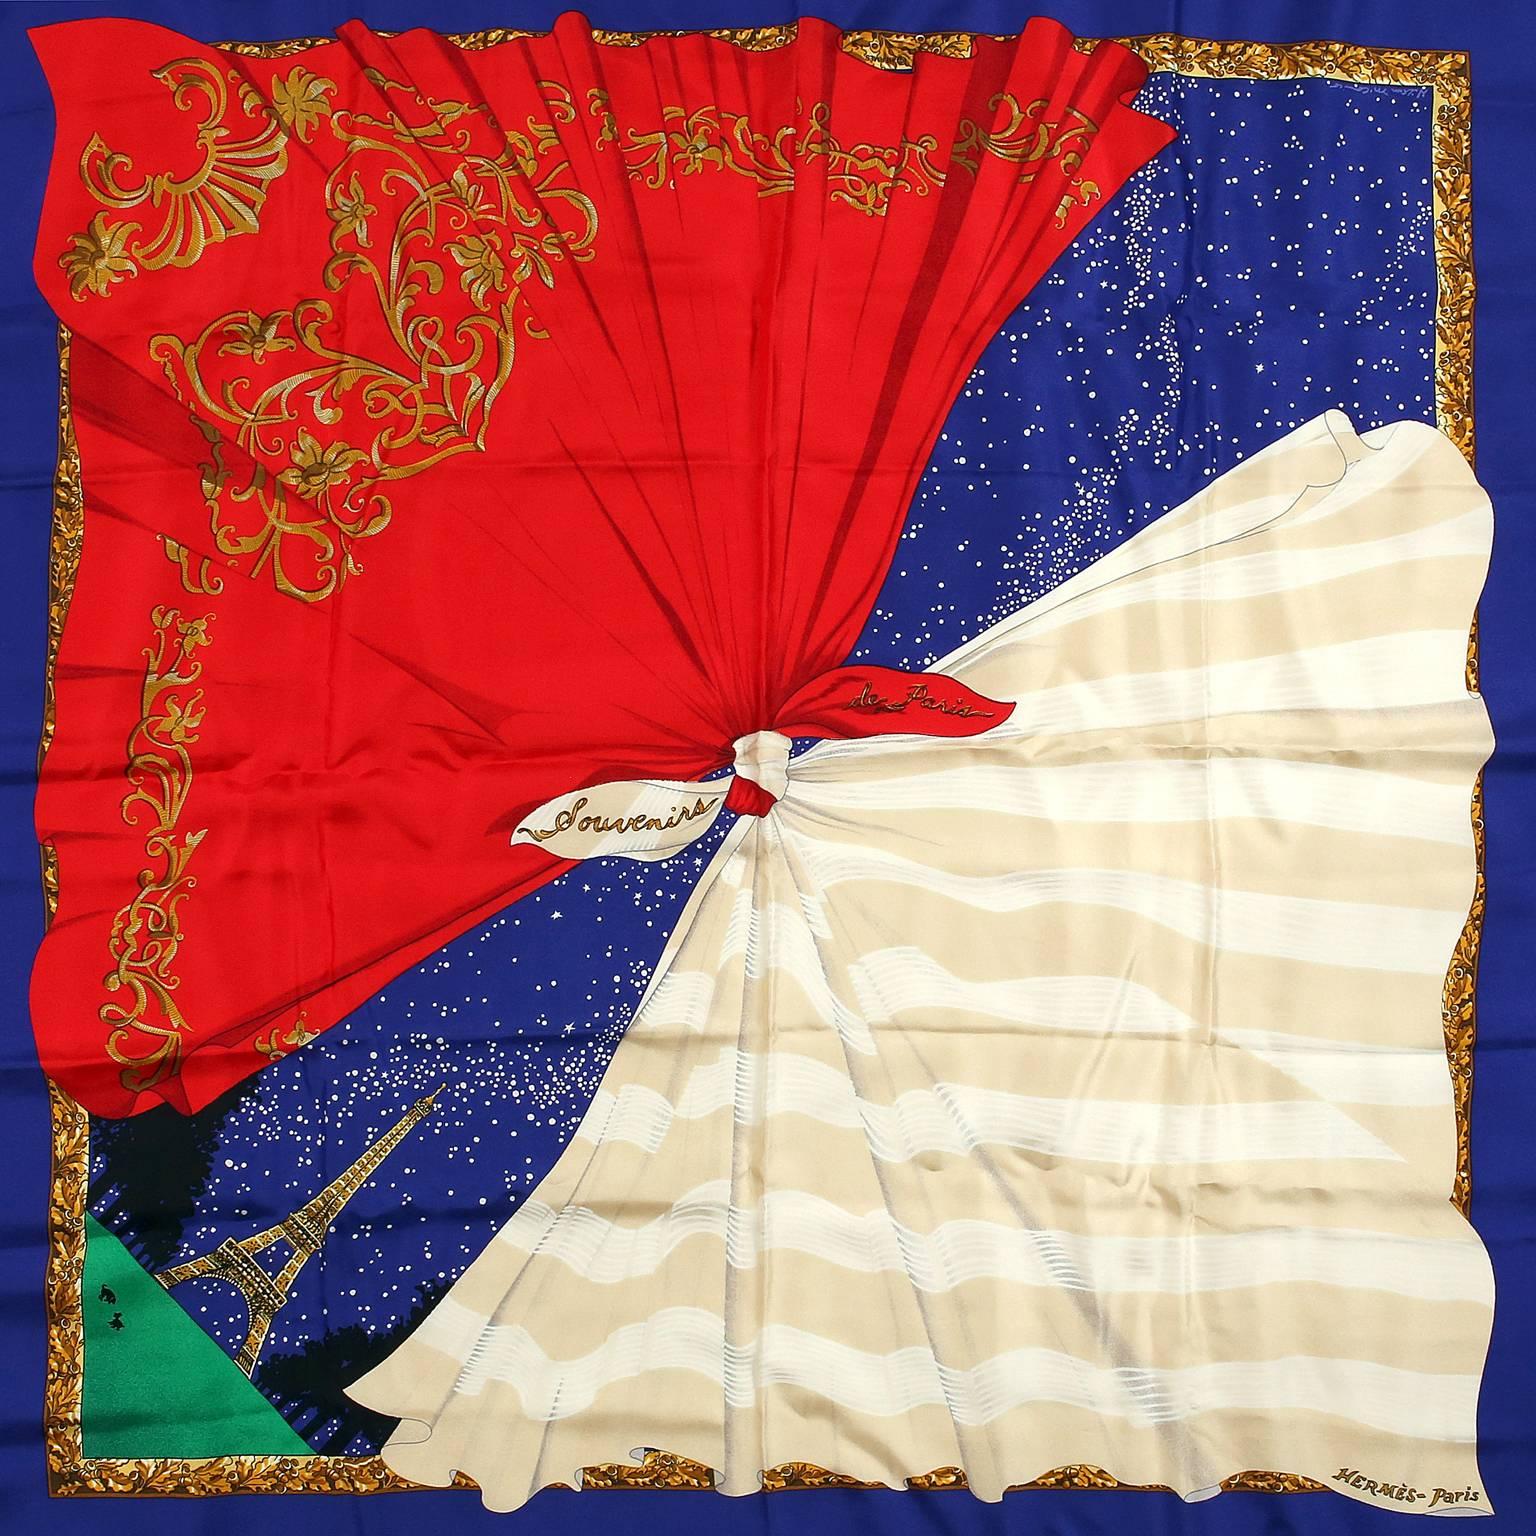 Hermès Souvenirs de Paris 90 cm Silk Scarf- PRISTINE
Designed by Hilton McConnico in the French national colors of red, white and blue. 
A blue background depicts a starry night in Paris, featuring the Eiffel Tower and two Hermès scarves tied